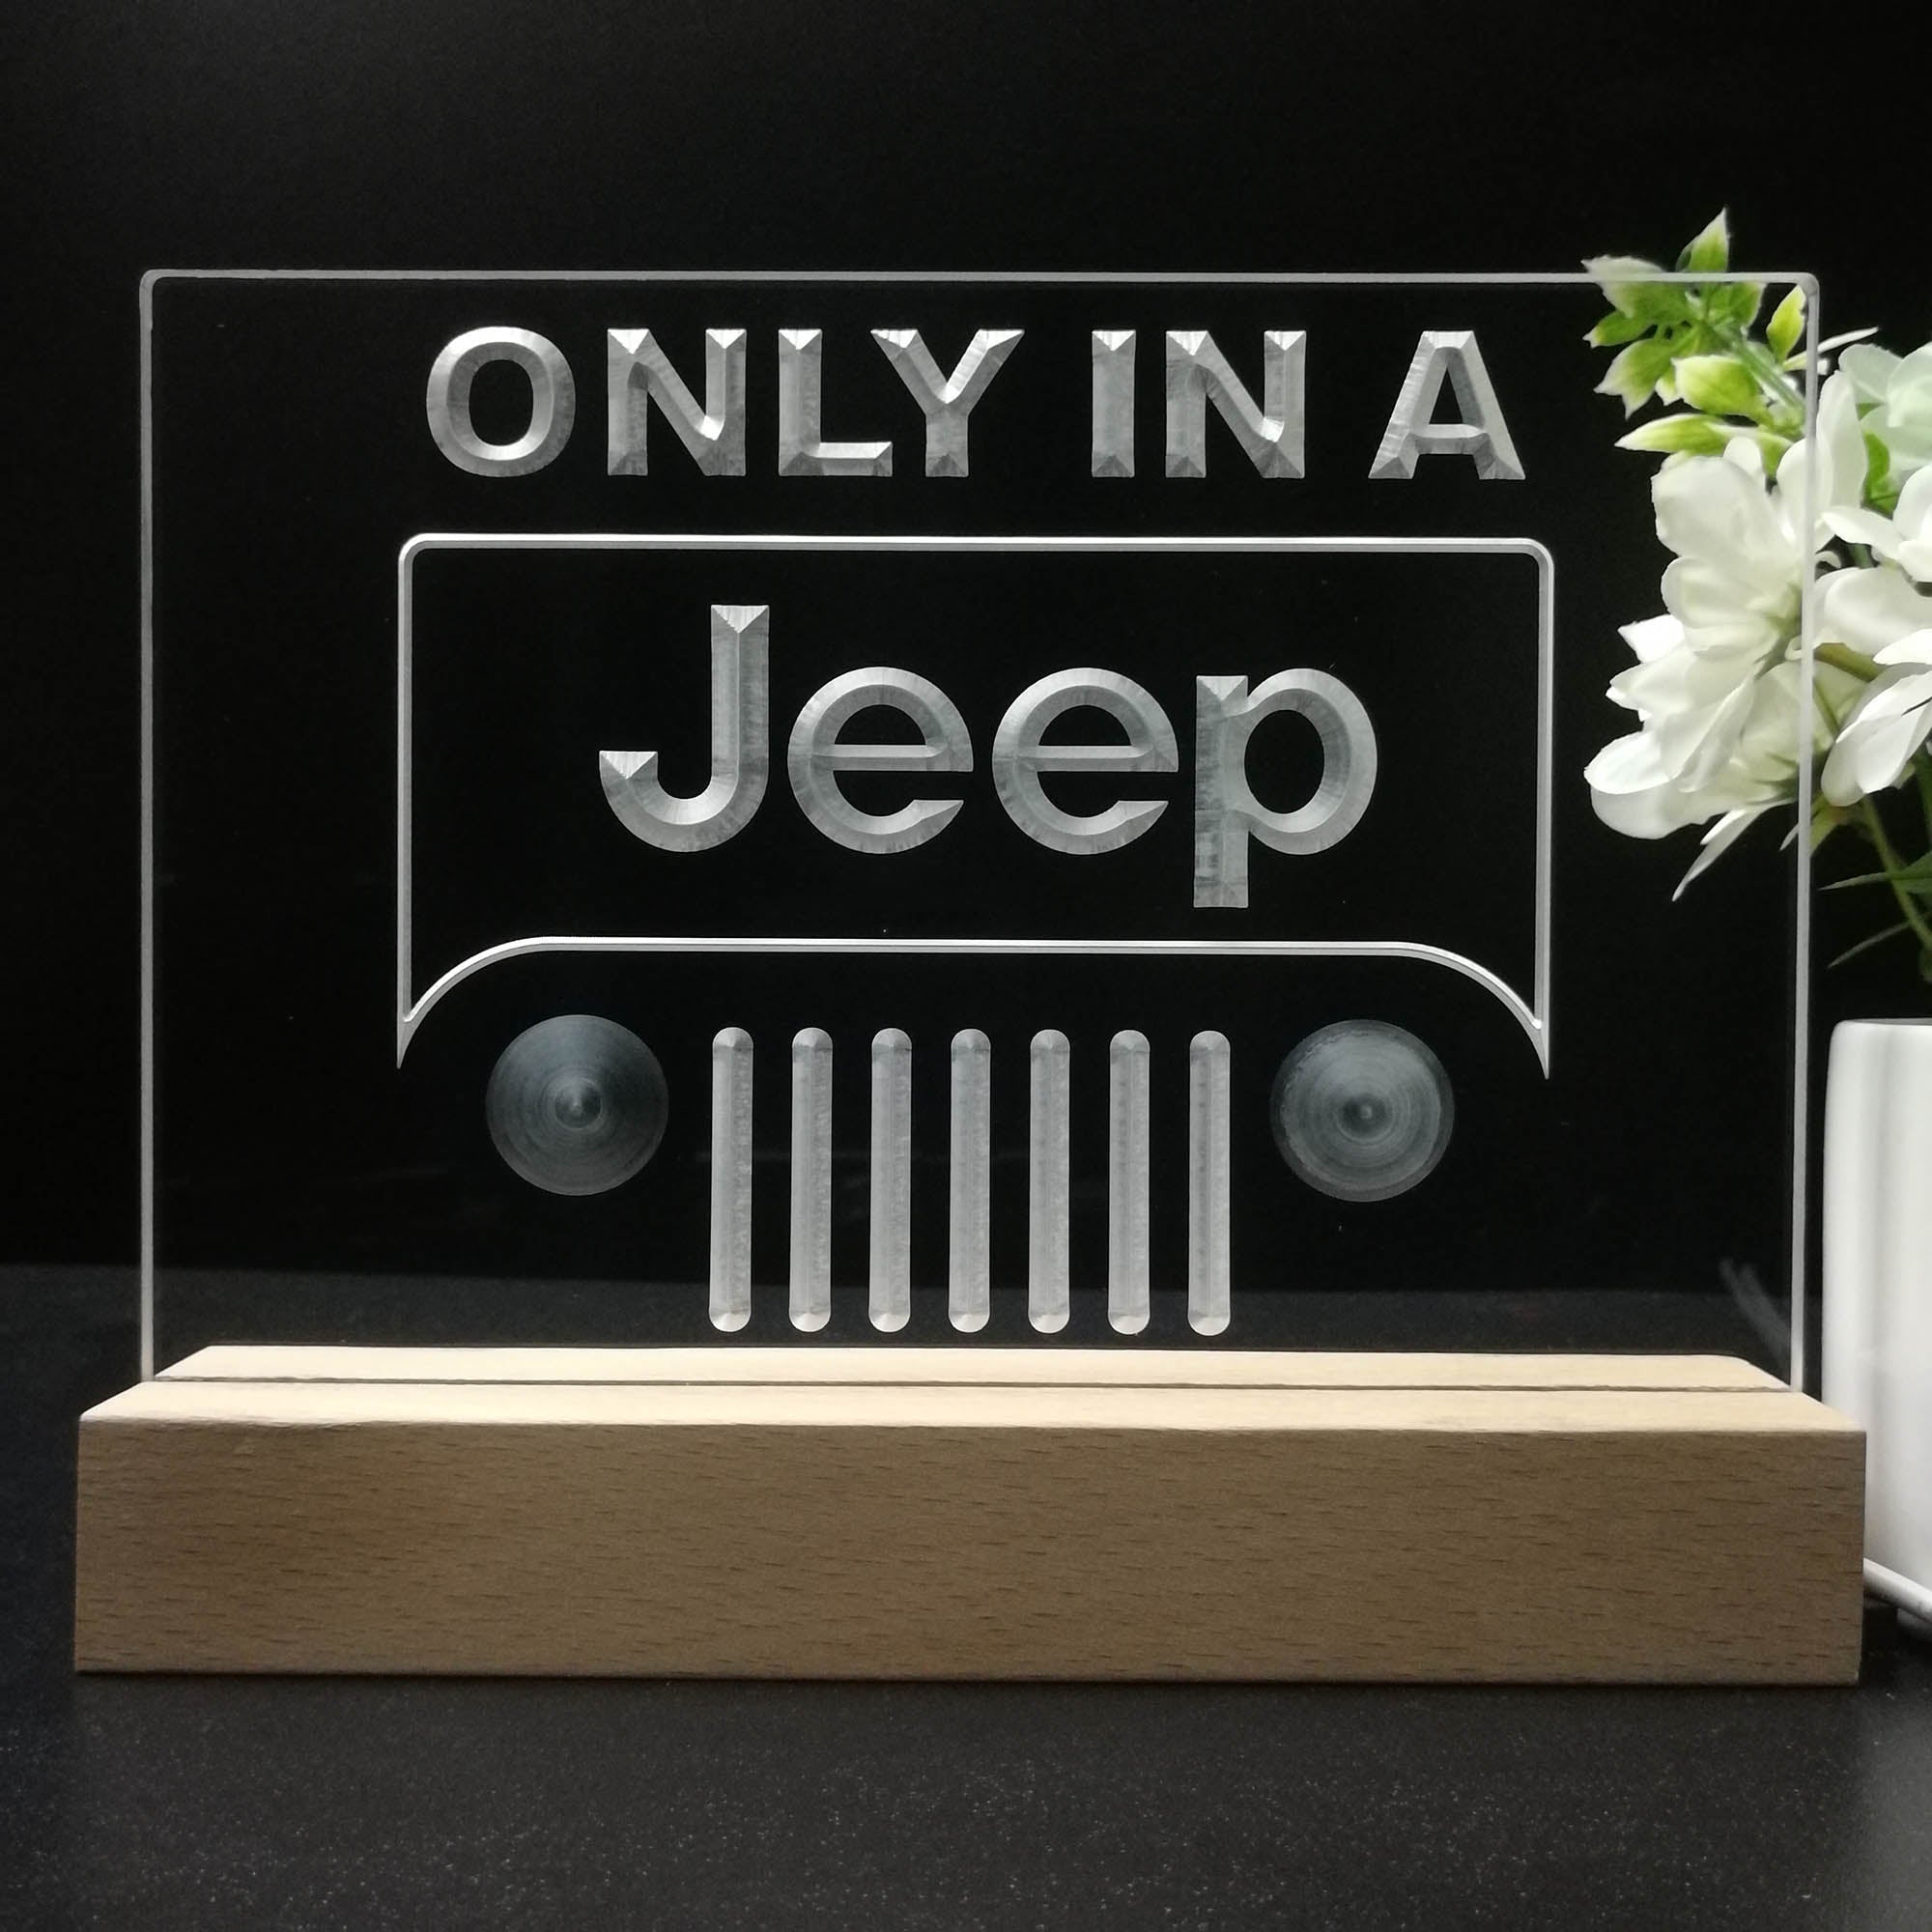 Only in a Jeep 4x4 Sport 3D LED Illusion Night Light